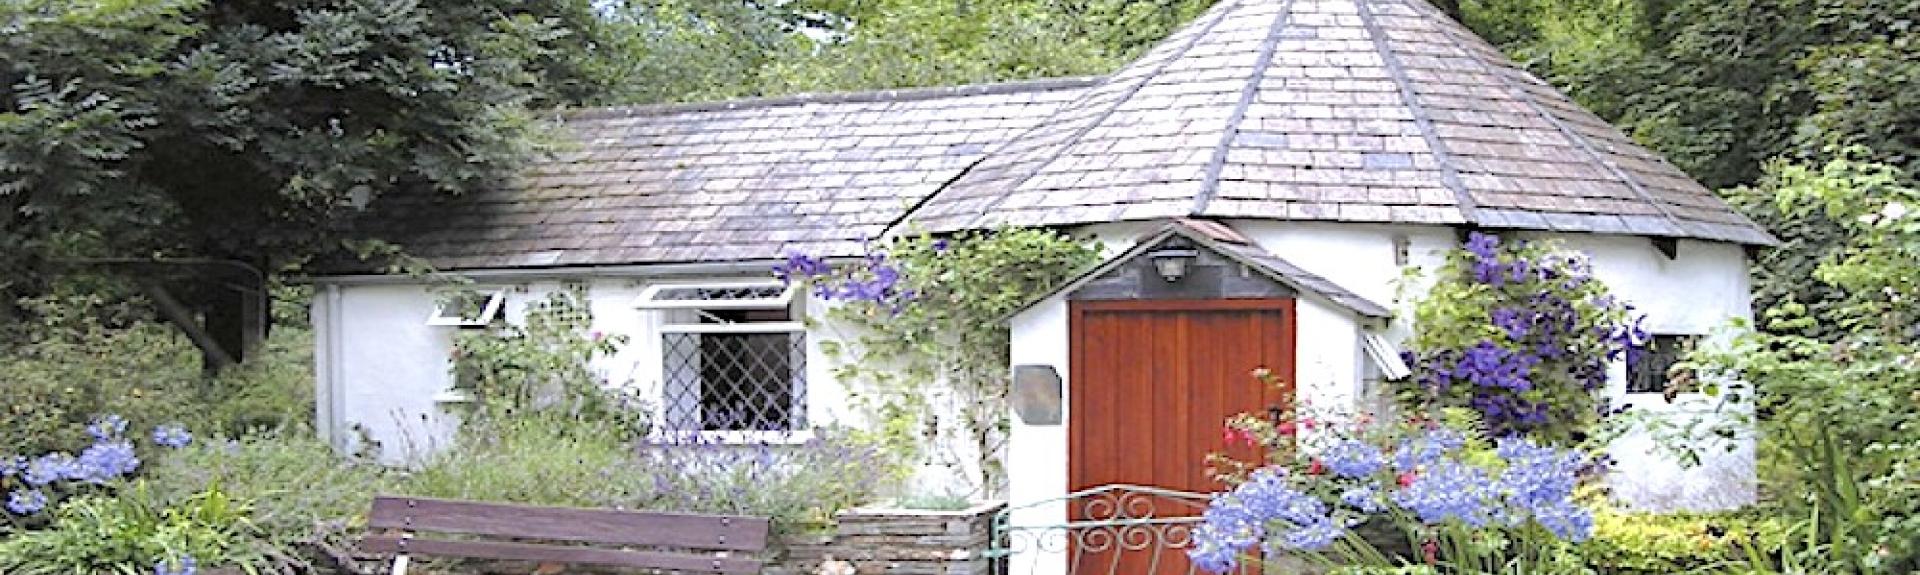 Exterior of a single-storey Cornish cottage surrouded by a tree-lined garden.